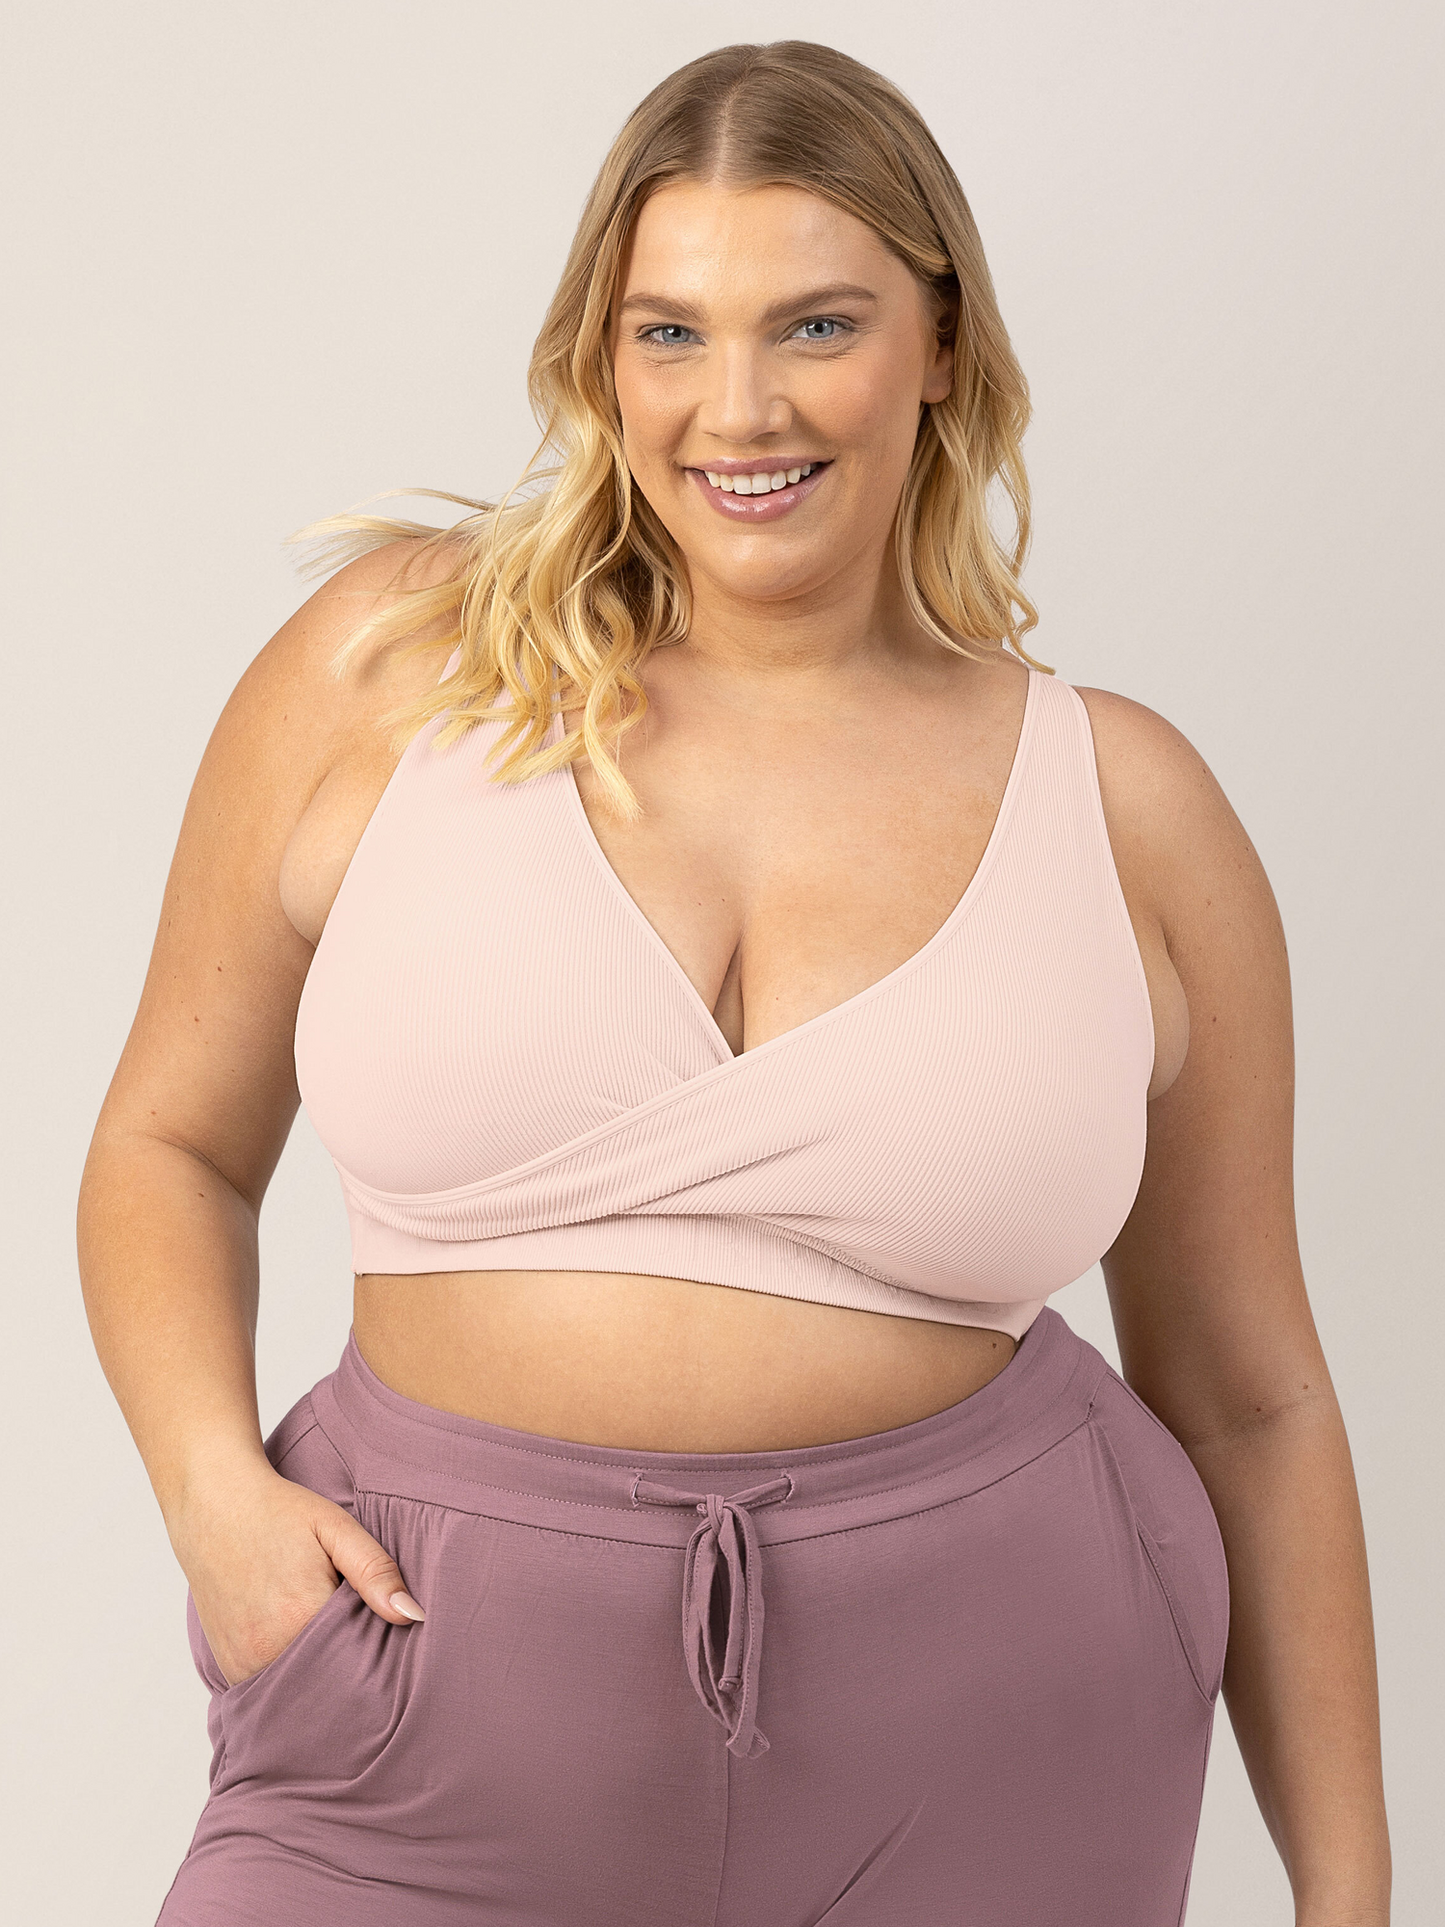 Busty Model wearing the Sublime® Adjustable Crossover Nursing & Lounge Bra in Soft Pink with her hand in her pocket. @model_info:Lauren is wearing an X-Large Busty.